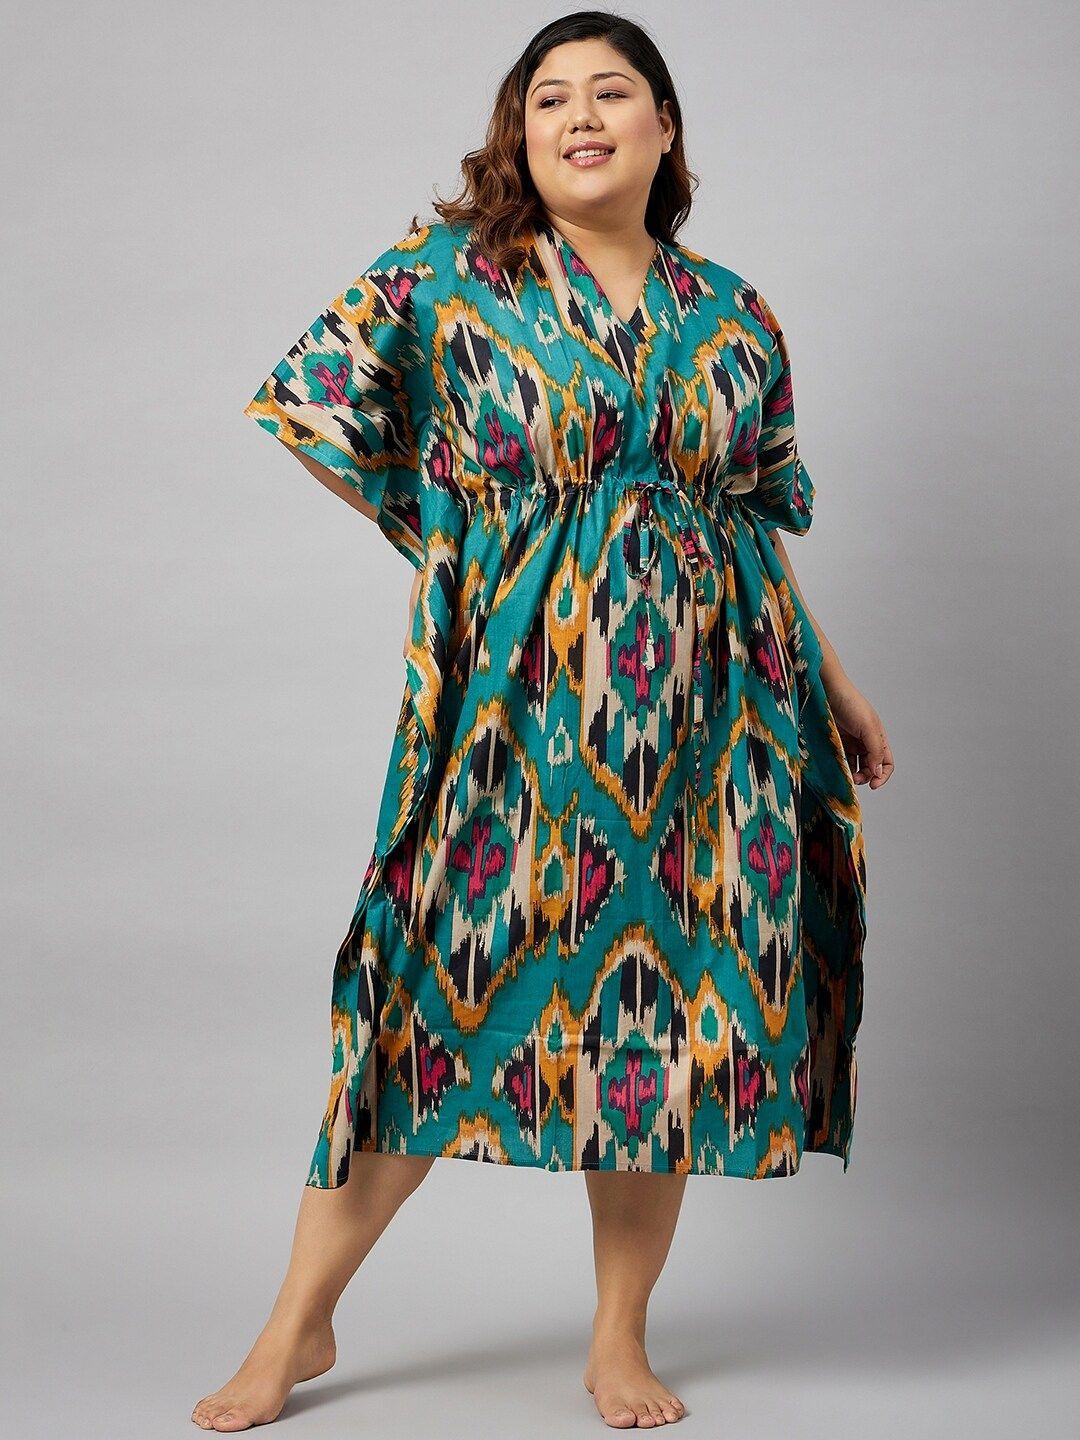 curves-by-zerokaata-plus-size-abstract-printed-pure-cotton-kaftan-nightdress